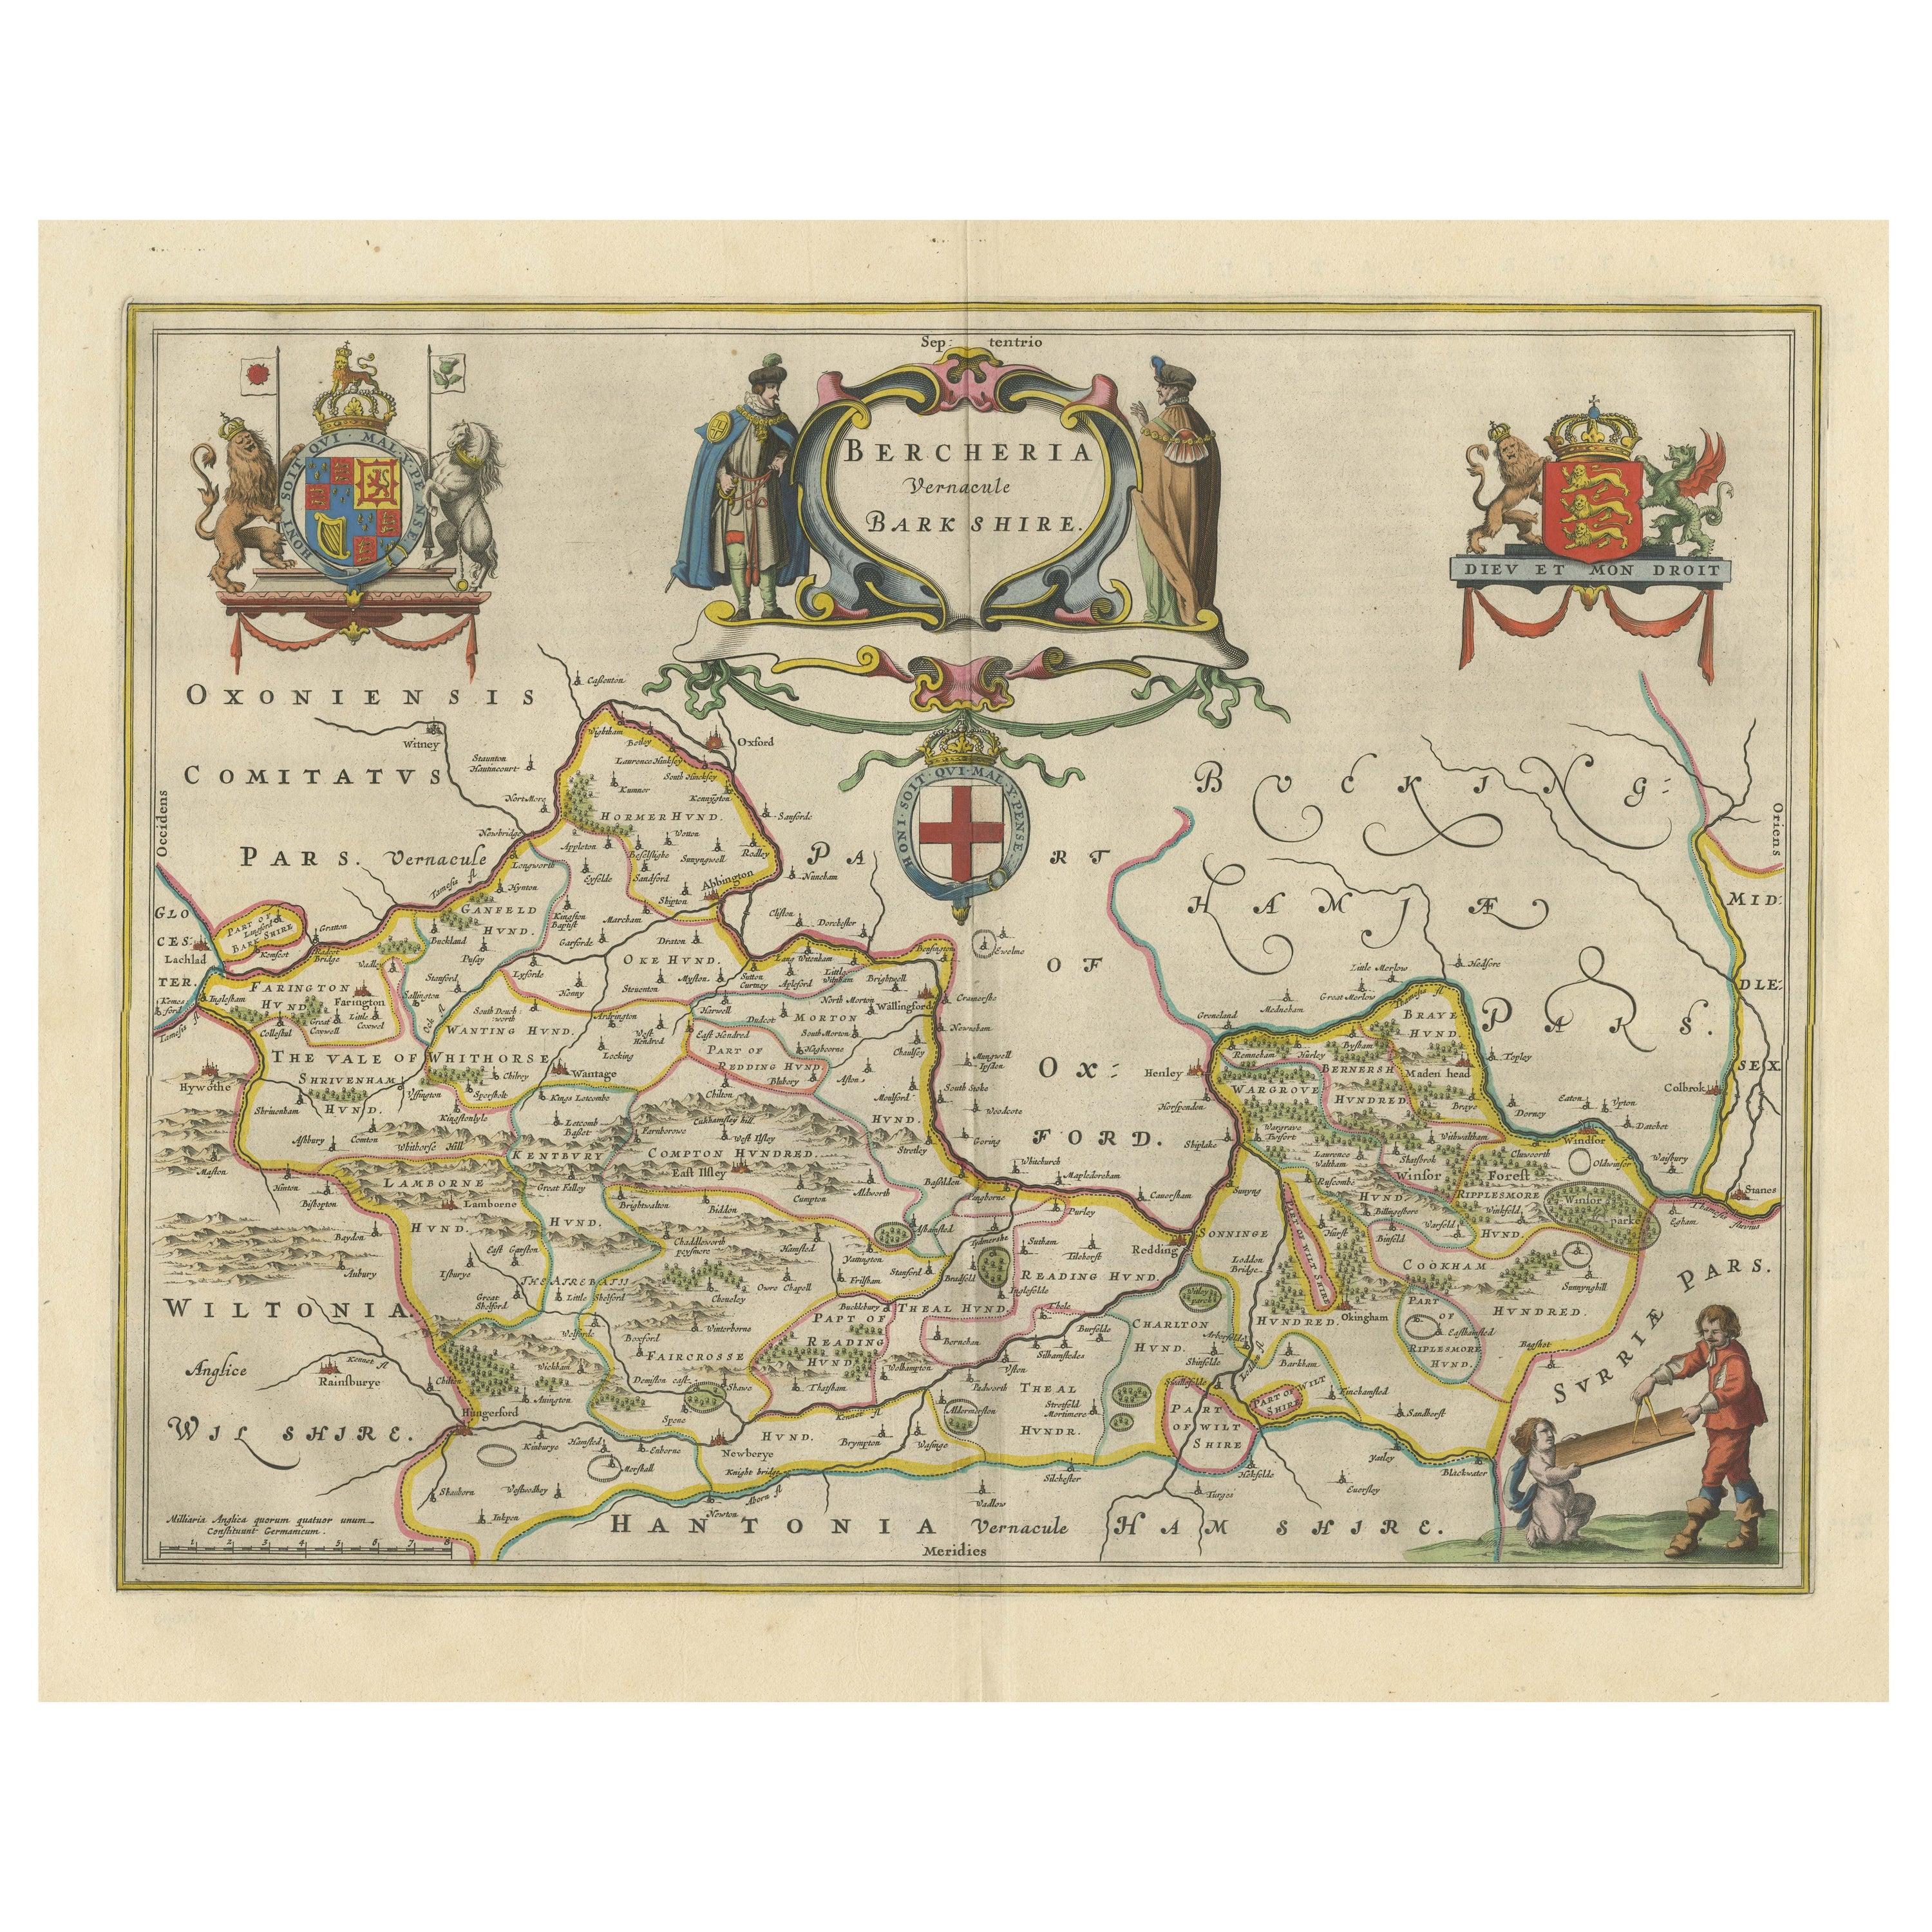 Antique Map of Berkshire, South East England For Sale